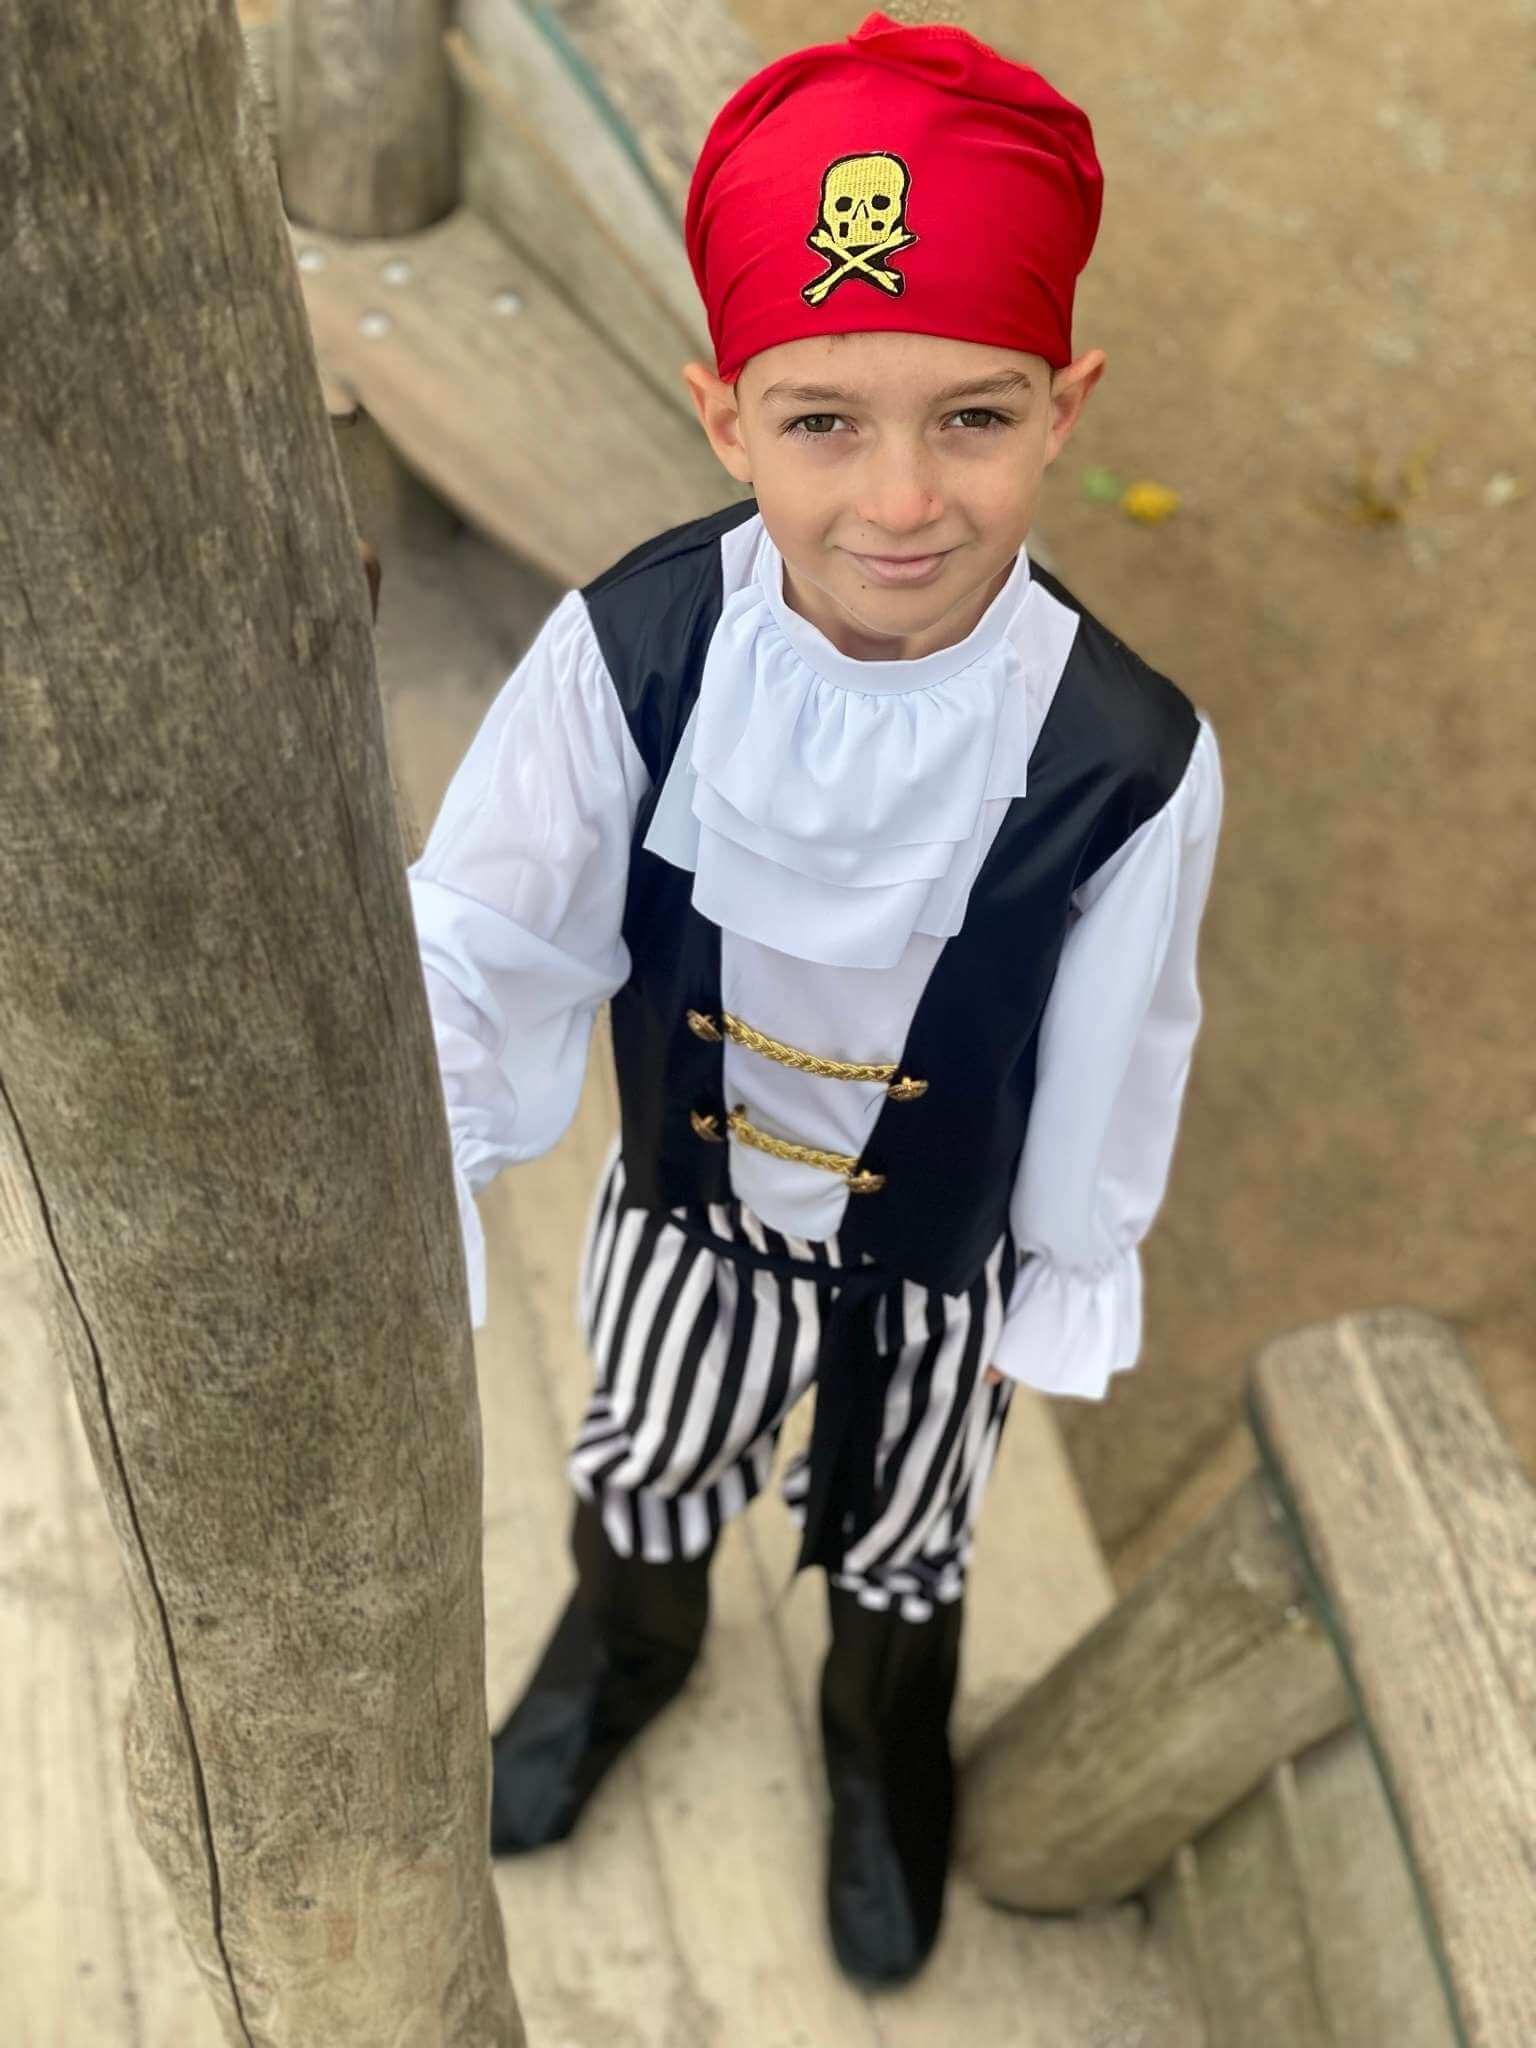 Boy stood on a wooden boat wearing the pirate fancy dress costume showing the skull and crossbones on the bandana. Also shows the detail of the ruffle collar and the golden waistcoat design. 